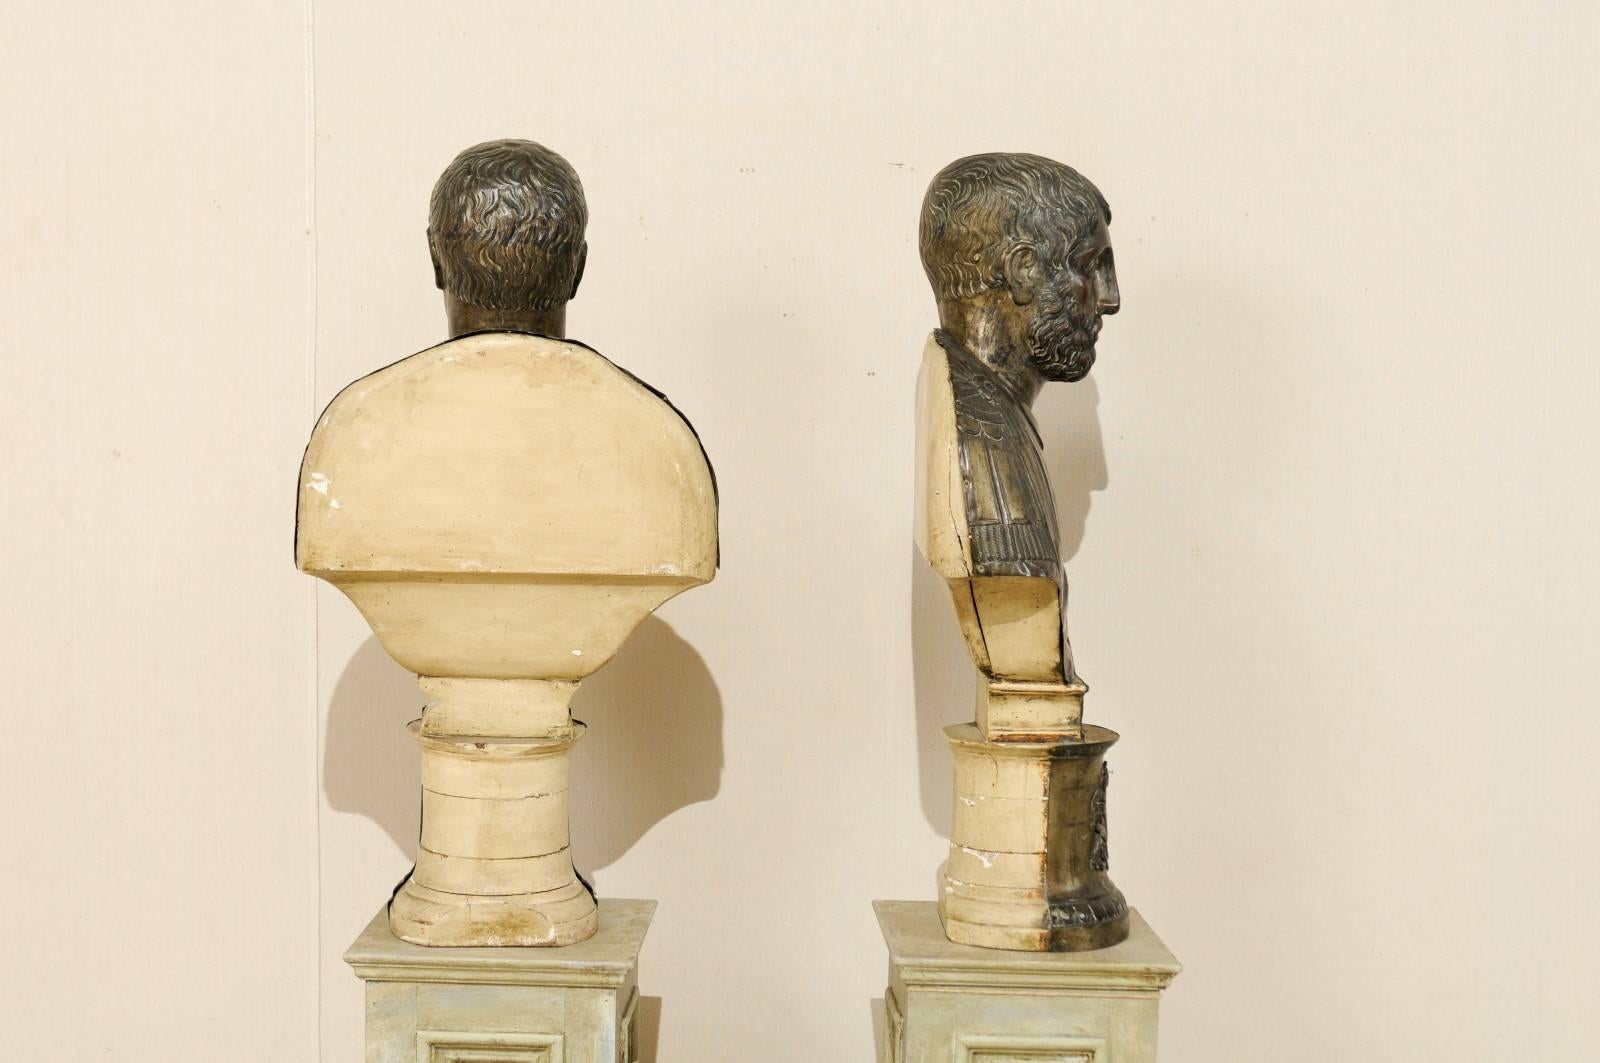 Pair of Italian 19th Century Roman Senator Busts of Repoussé Copper or Wood For Sale 3